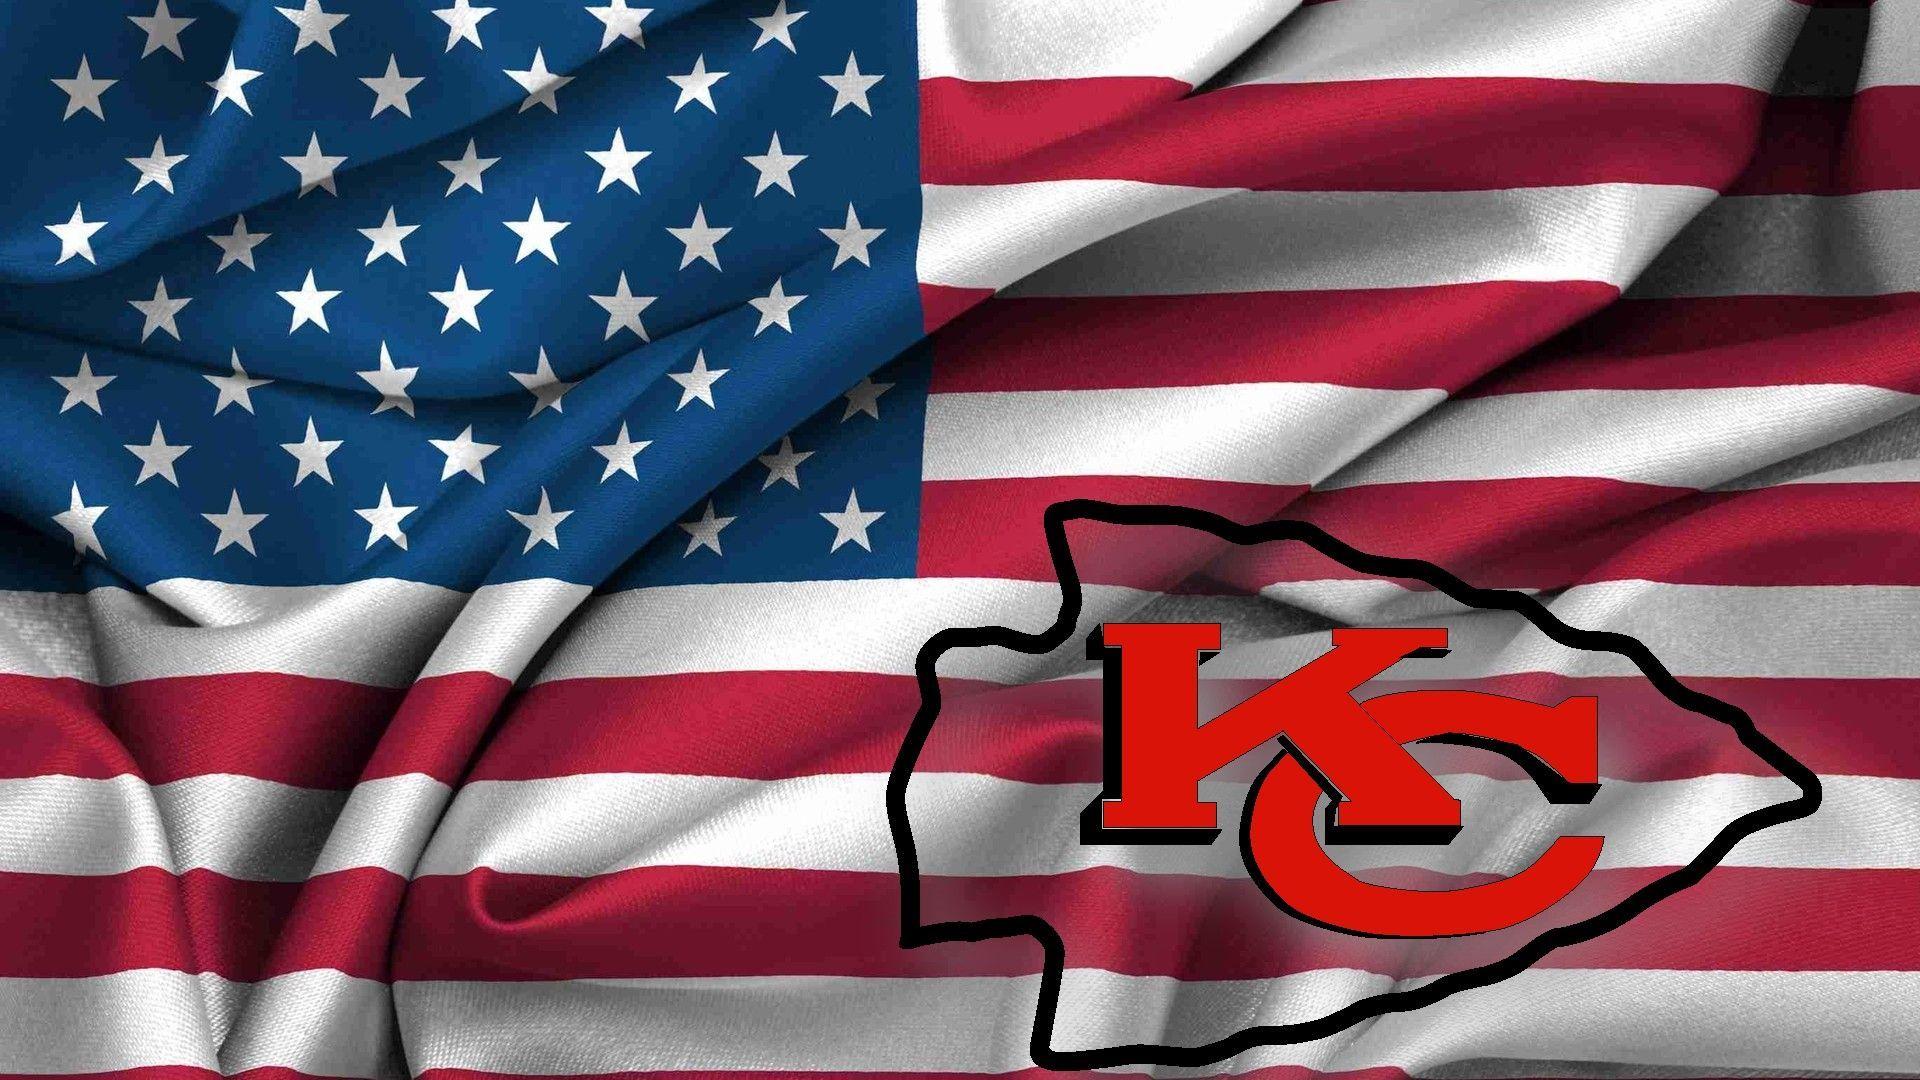 Kc Wallpapers Group